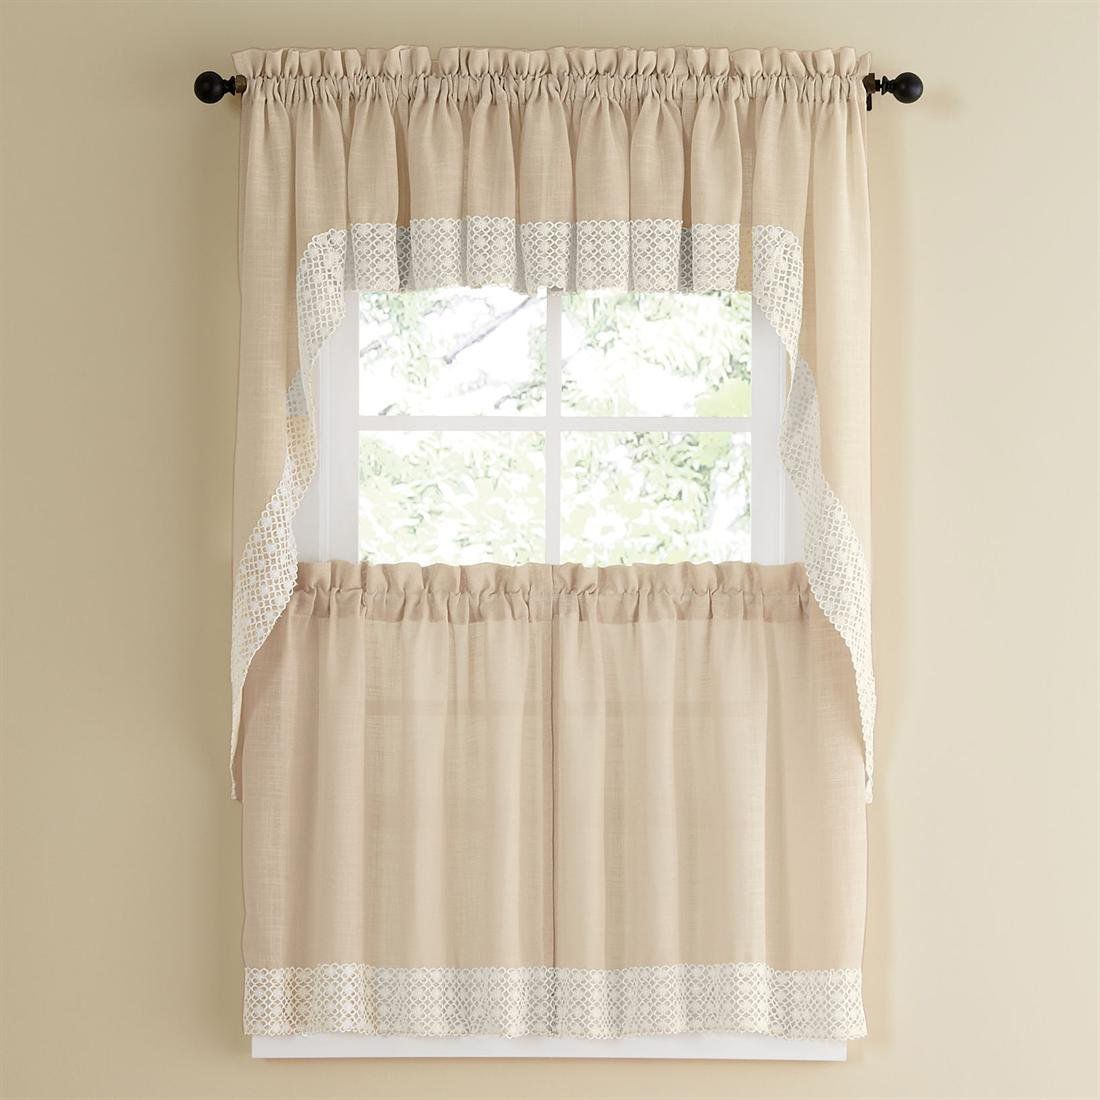 Details About Salem Kitchen Curtain – French Vanilla W/lace Trim – Lorraine  Home Fashions Throughout Tranquility Curtain Tier Pairs (View 11 of 20)